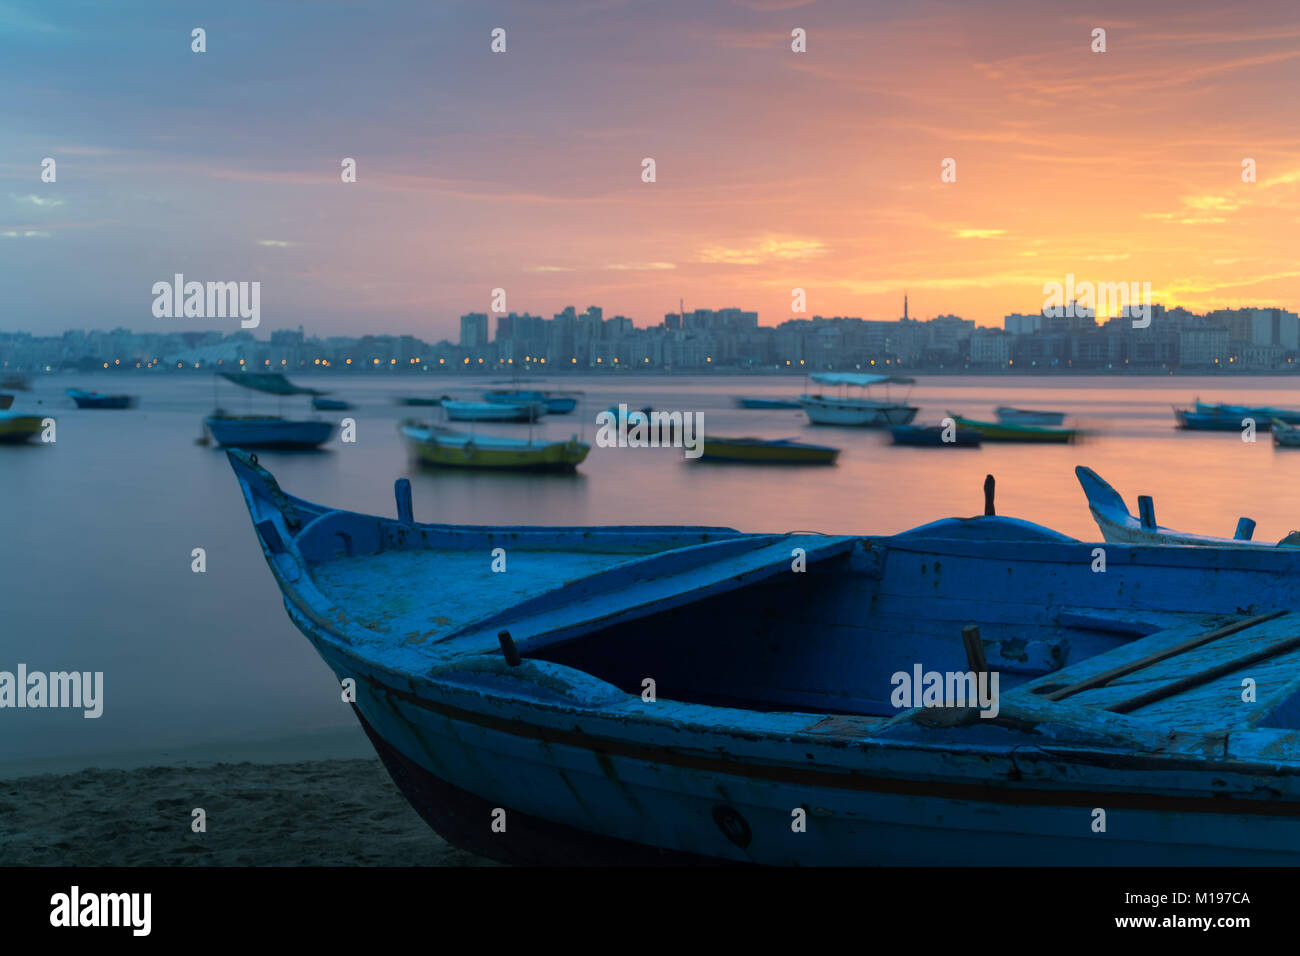 Turquoise blue fishing boat on the beach at sunrise with Alexandria skyline in far distance and colorful sky at sunrise Stock Photo